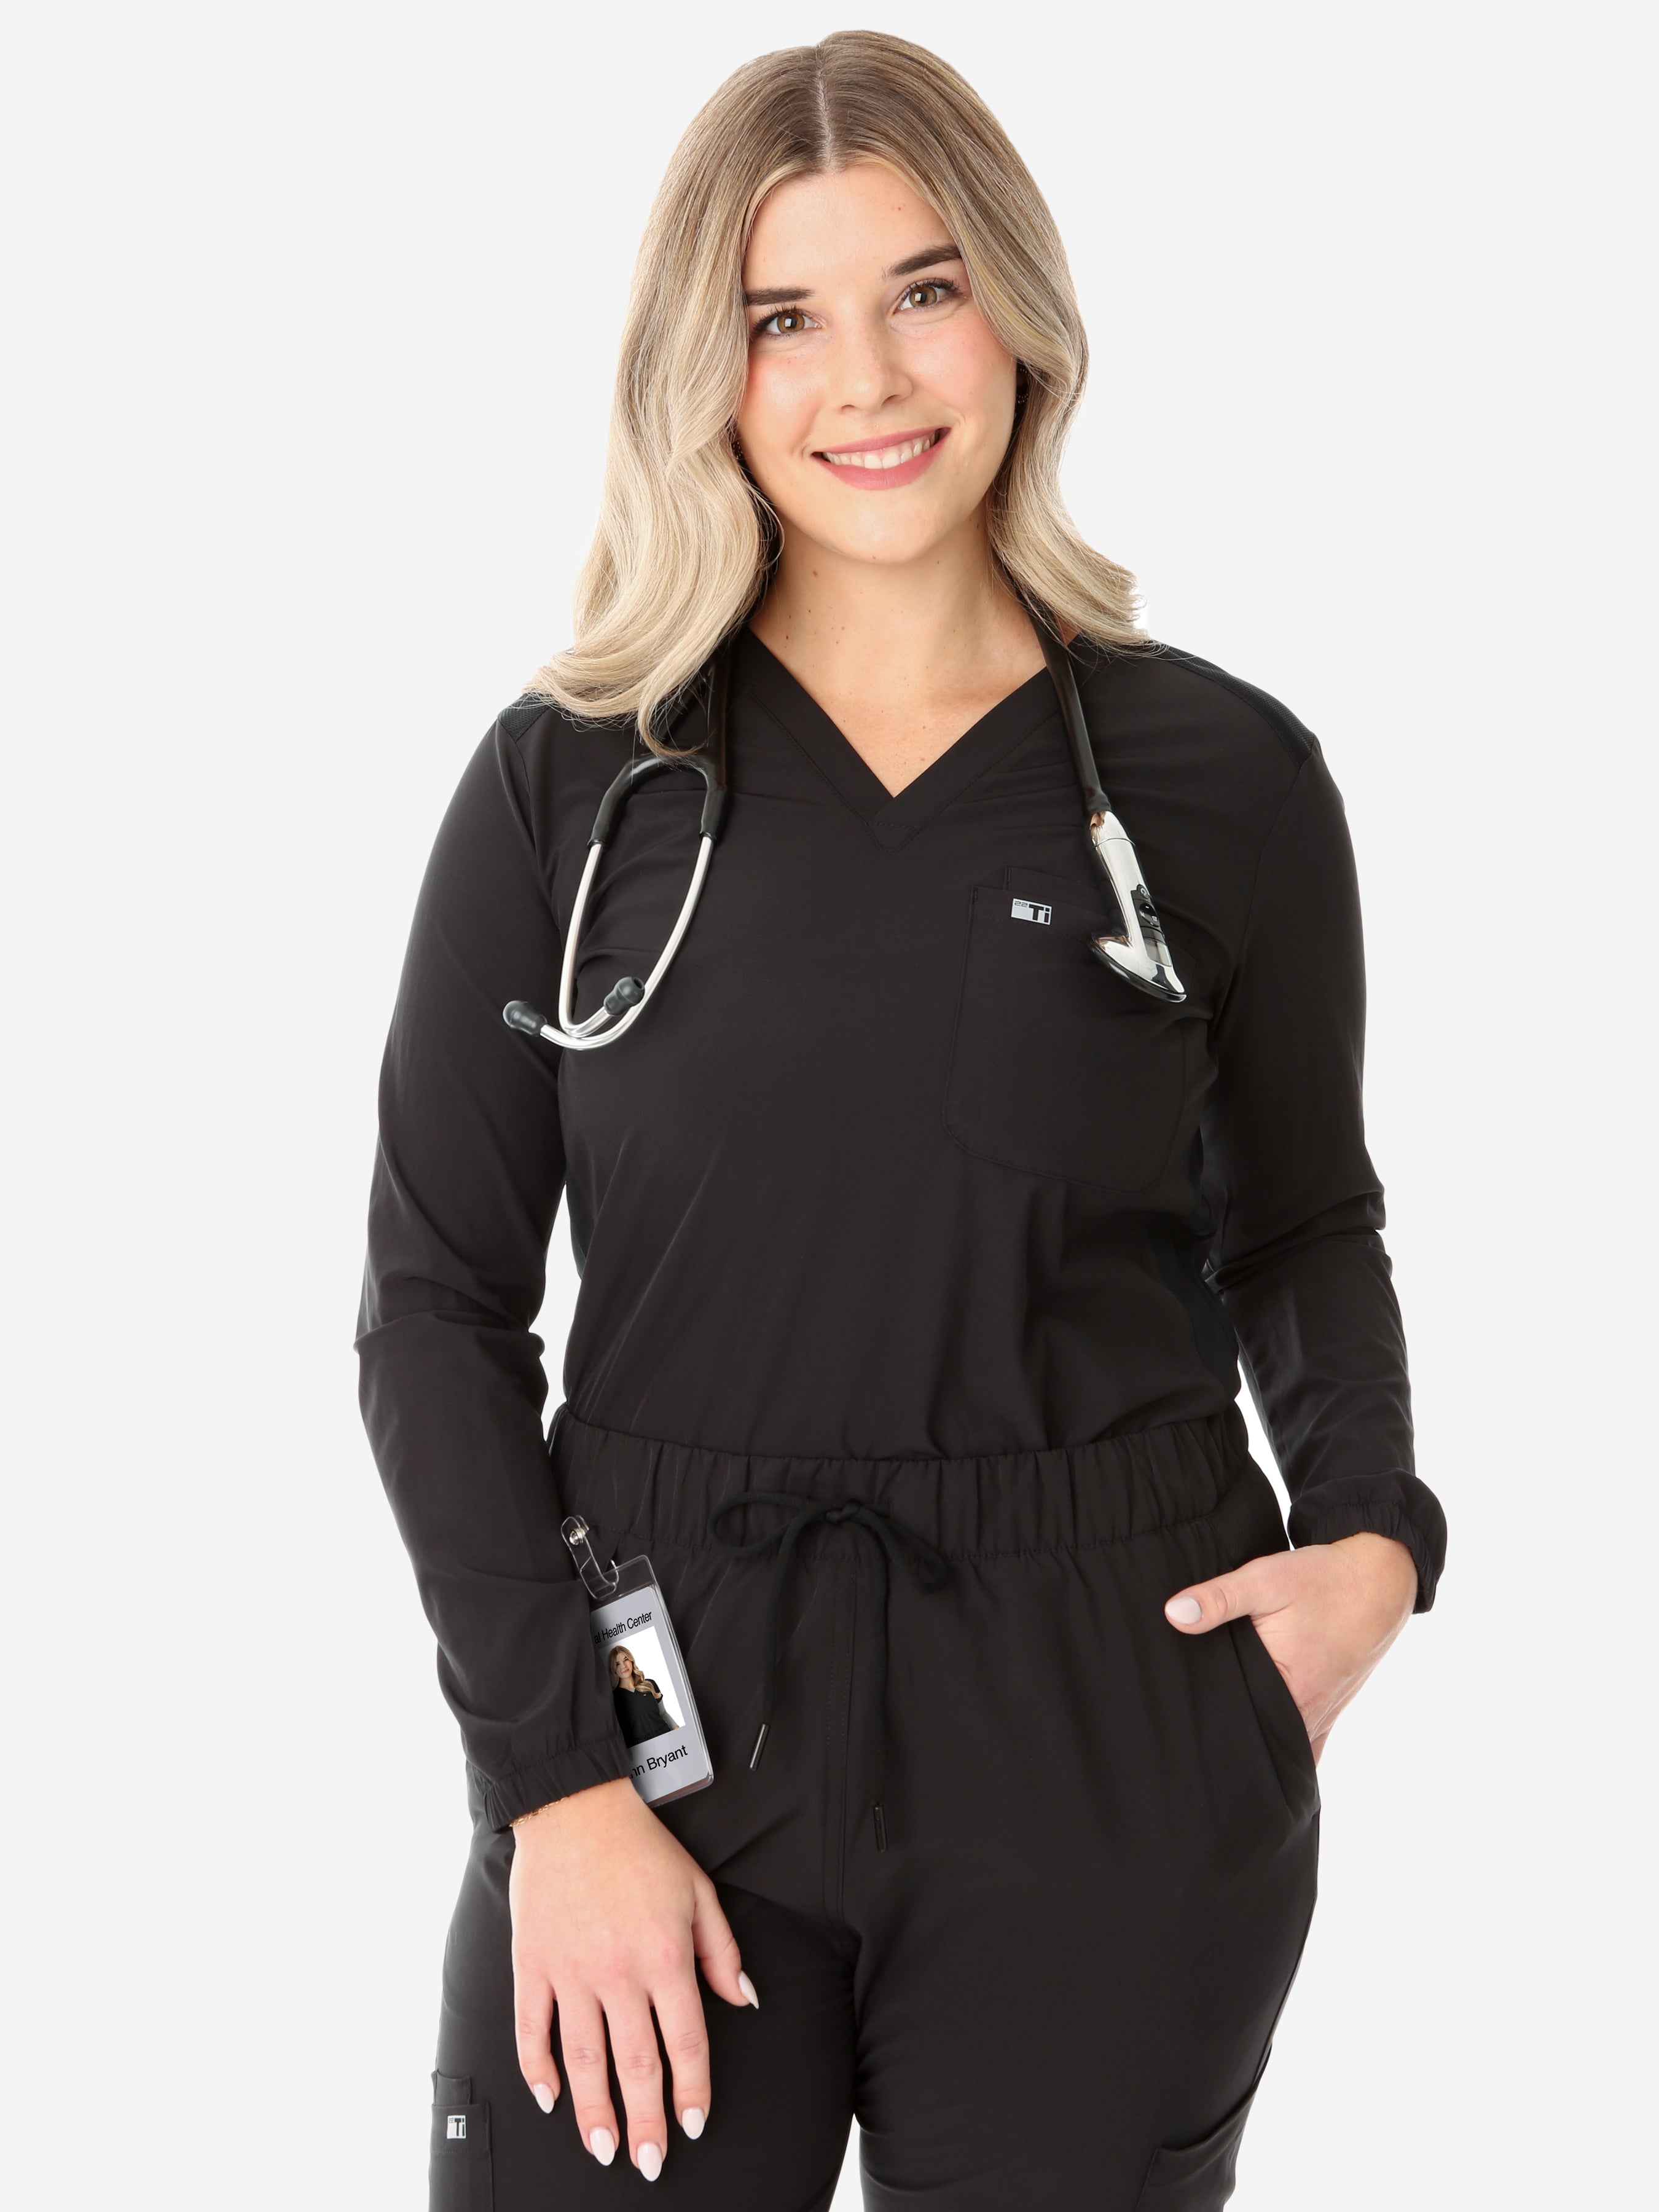 Women's Real Black Long-Sleeve Scrub Top Front View Top Only Tucked with Stethoscope